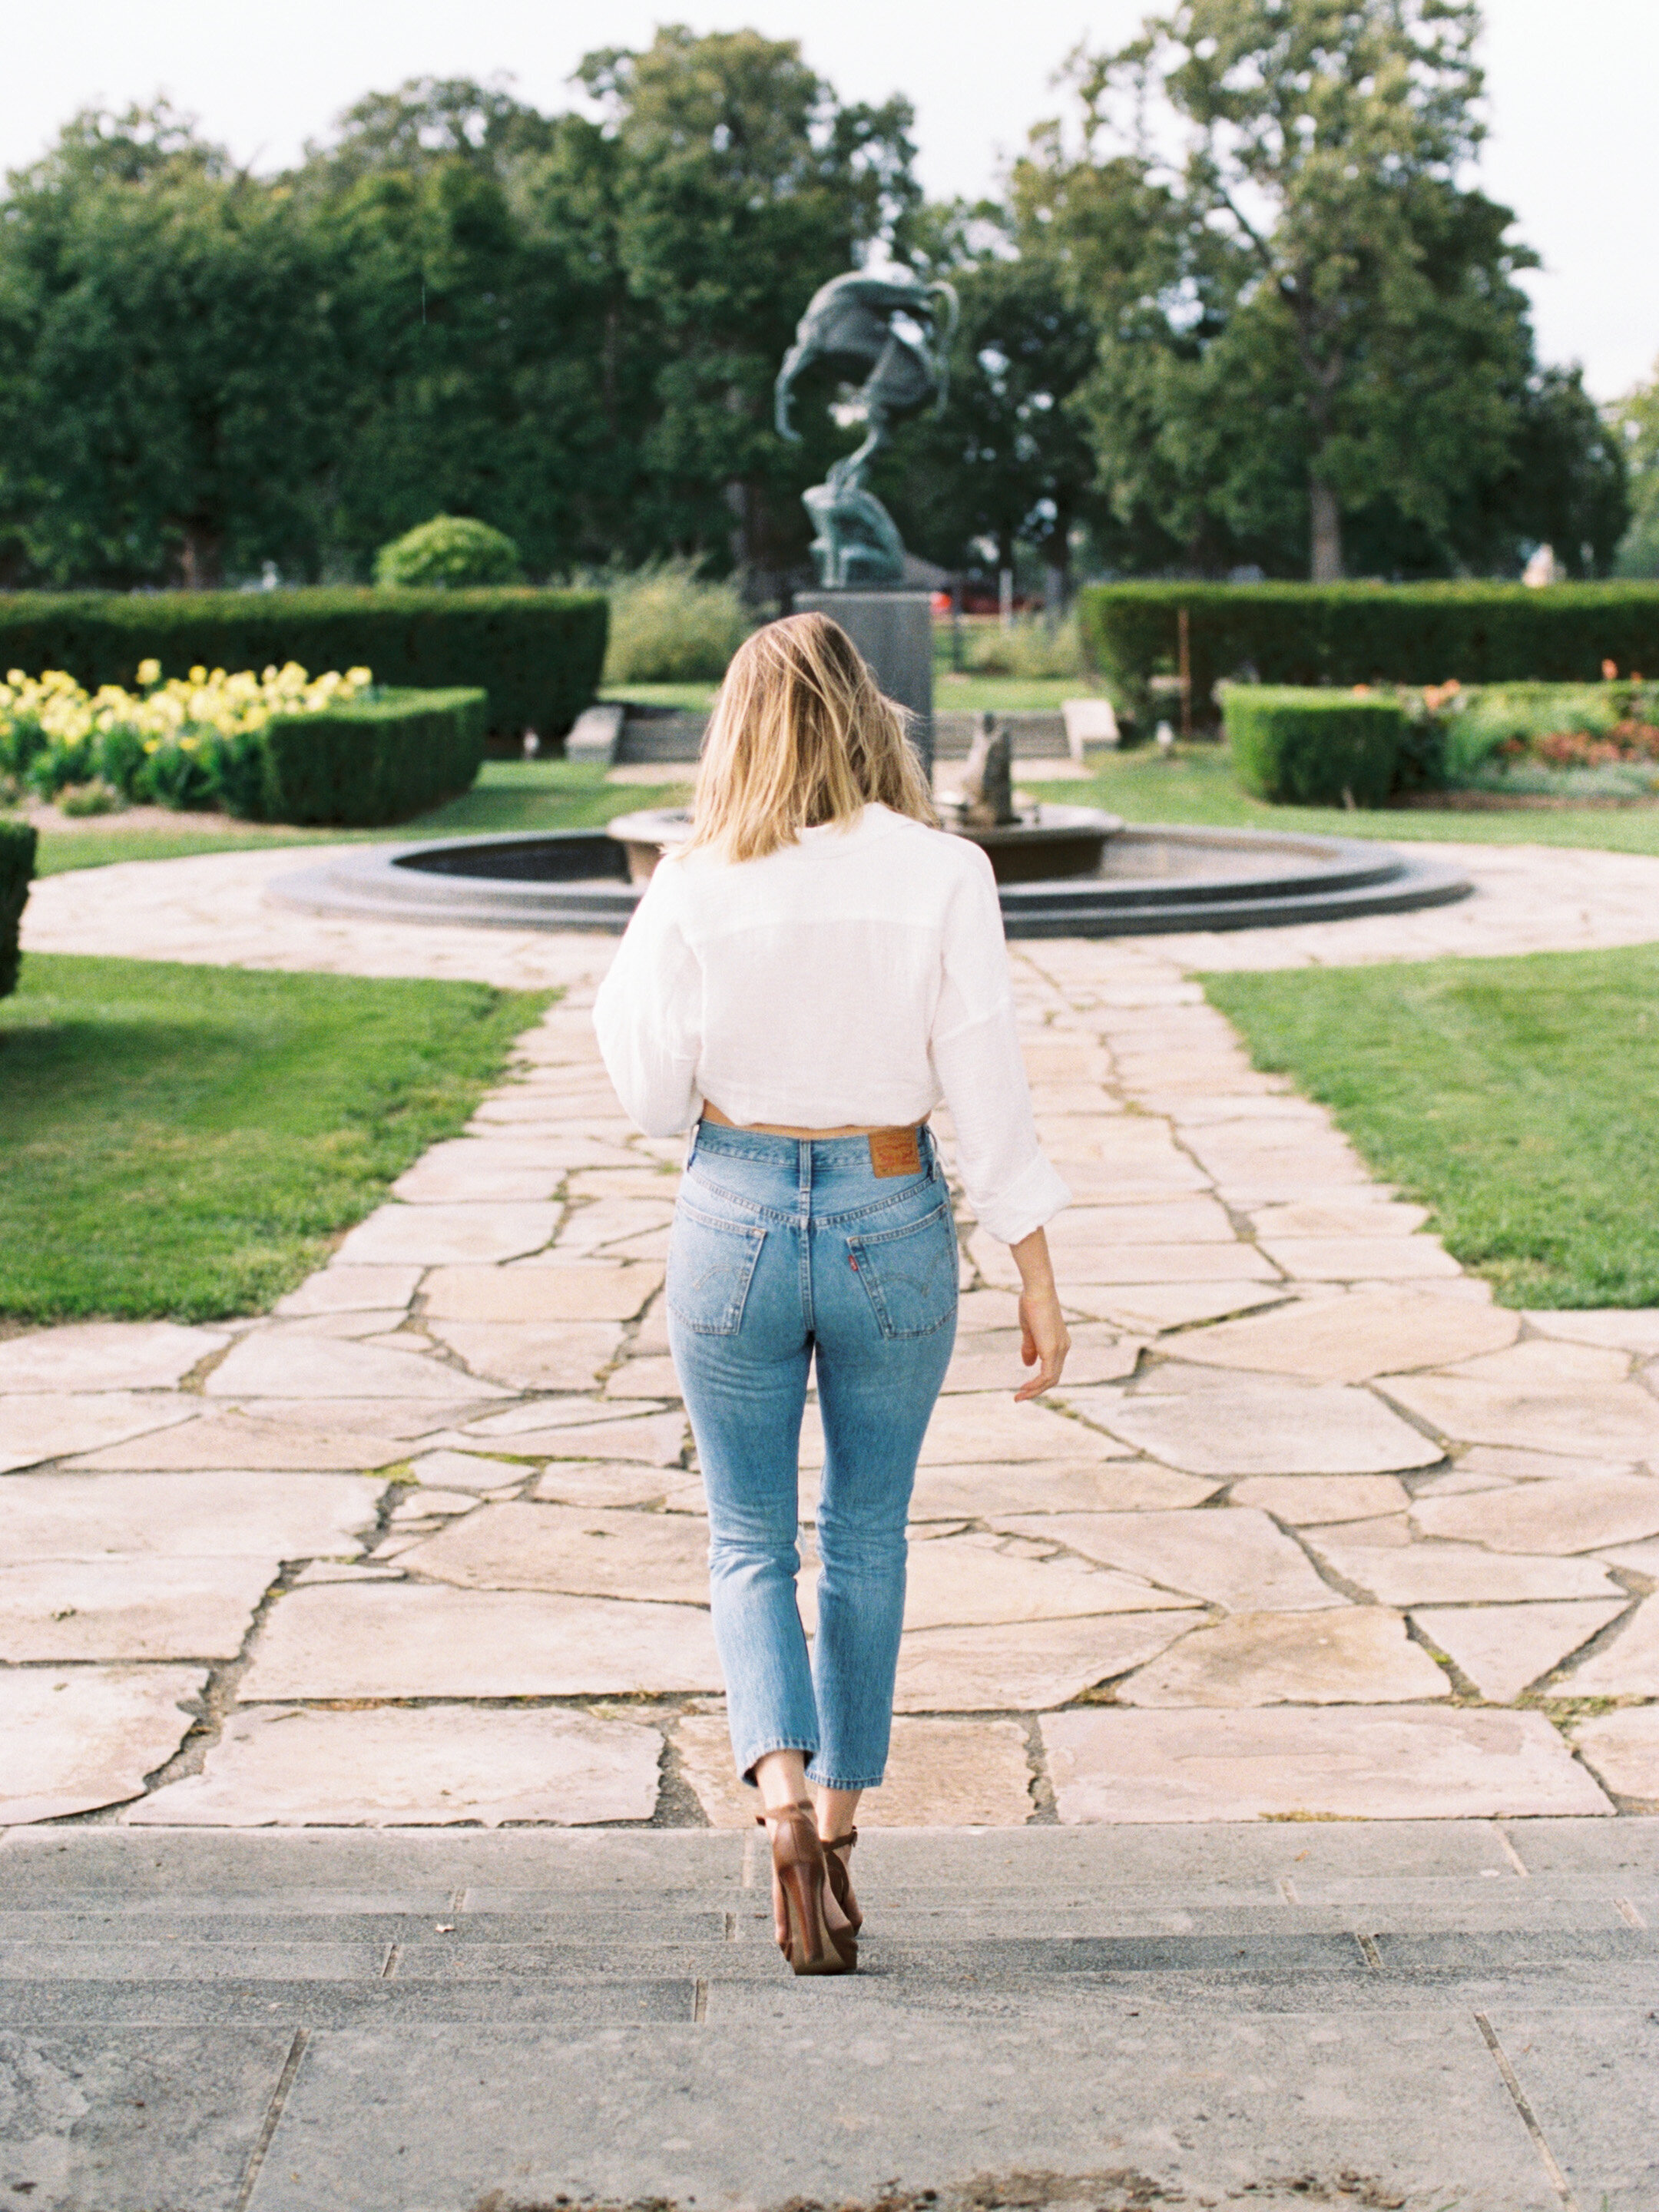 How to Shop for Jeans That Make Your Butt Look Good